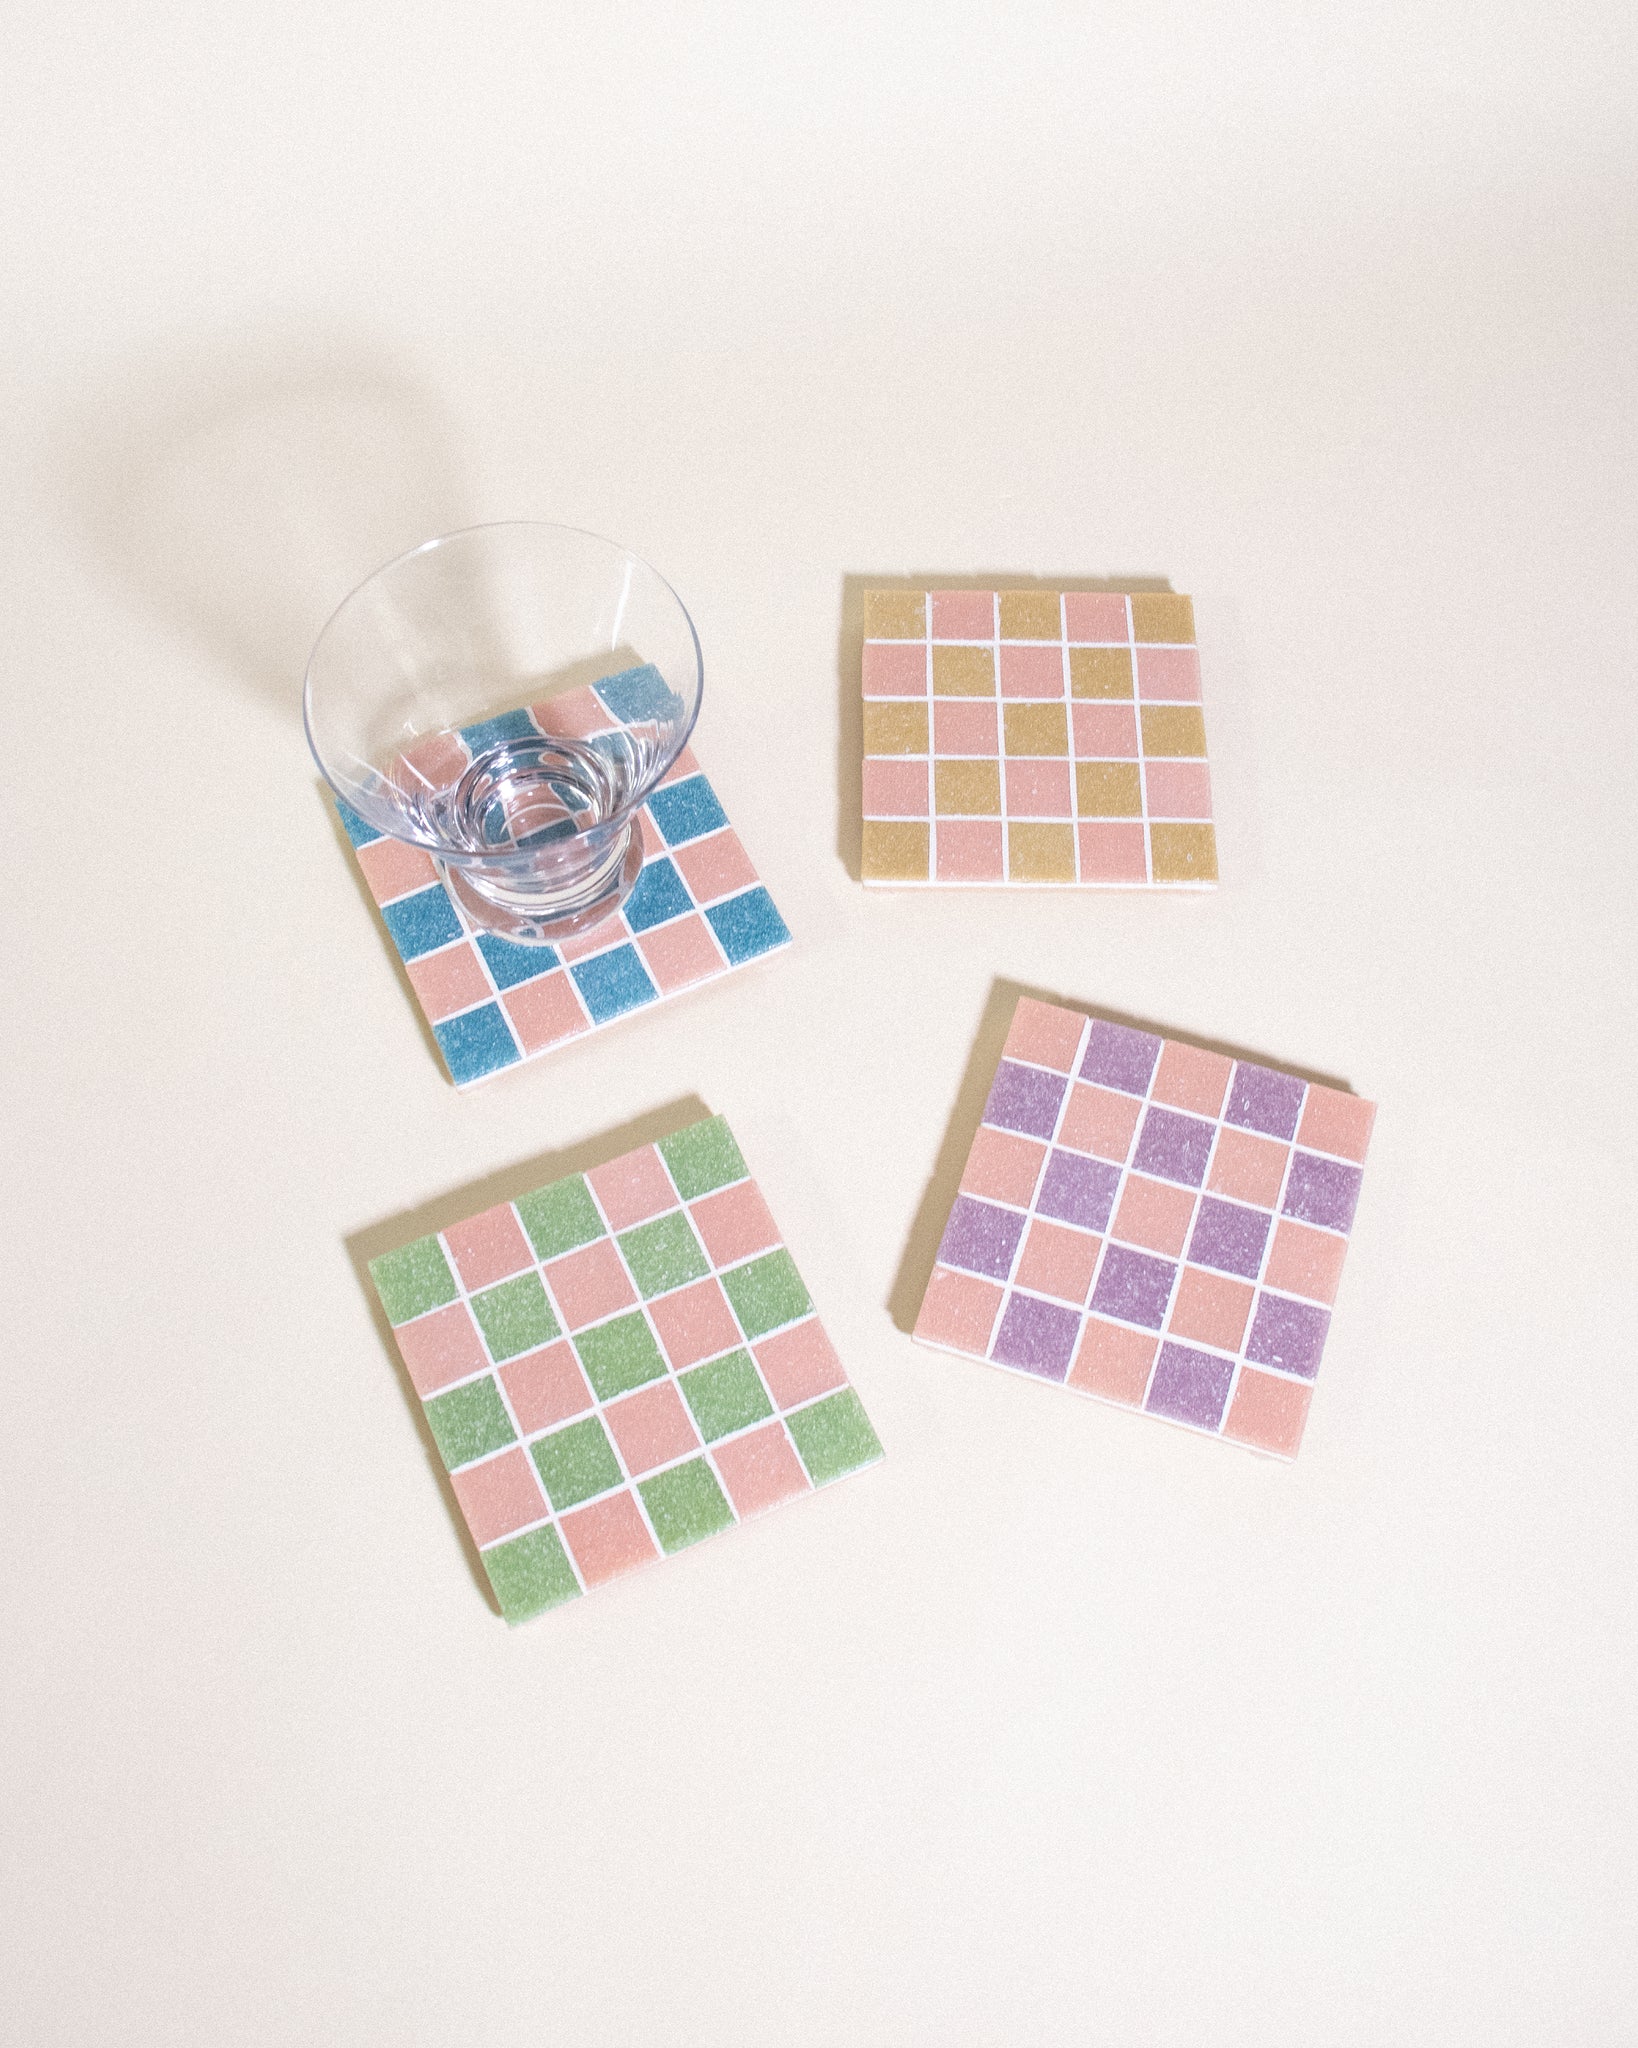 GLASS TILE COASTER - Sour Patch Candy - 09